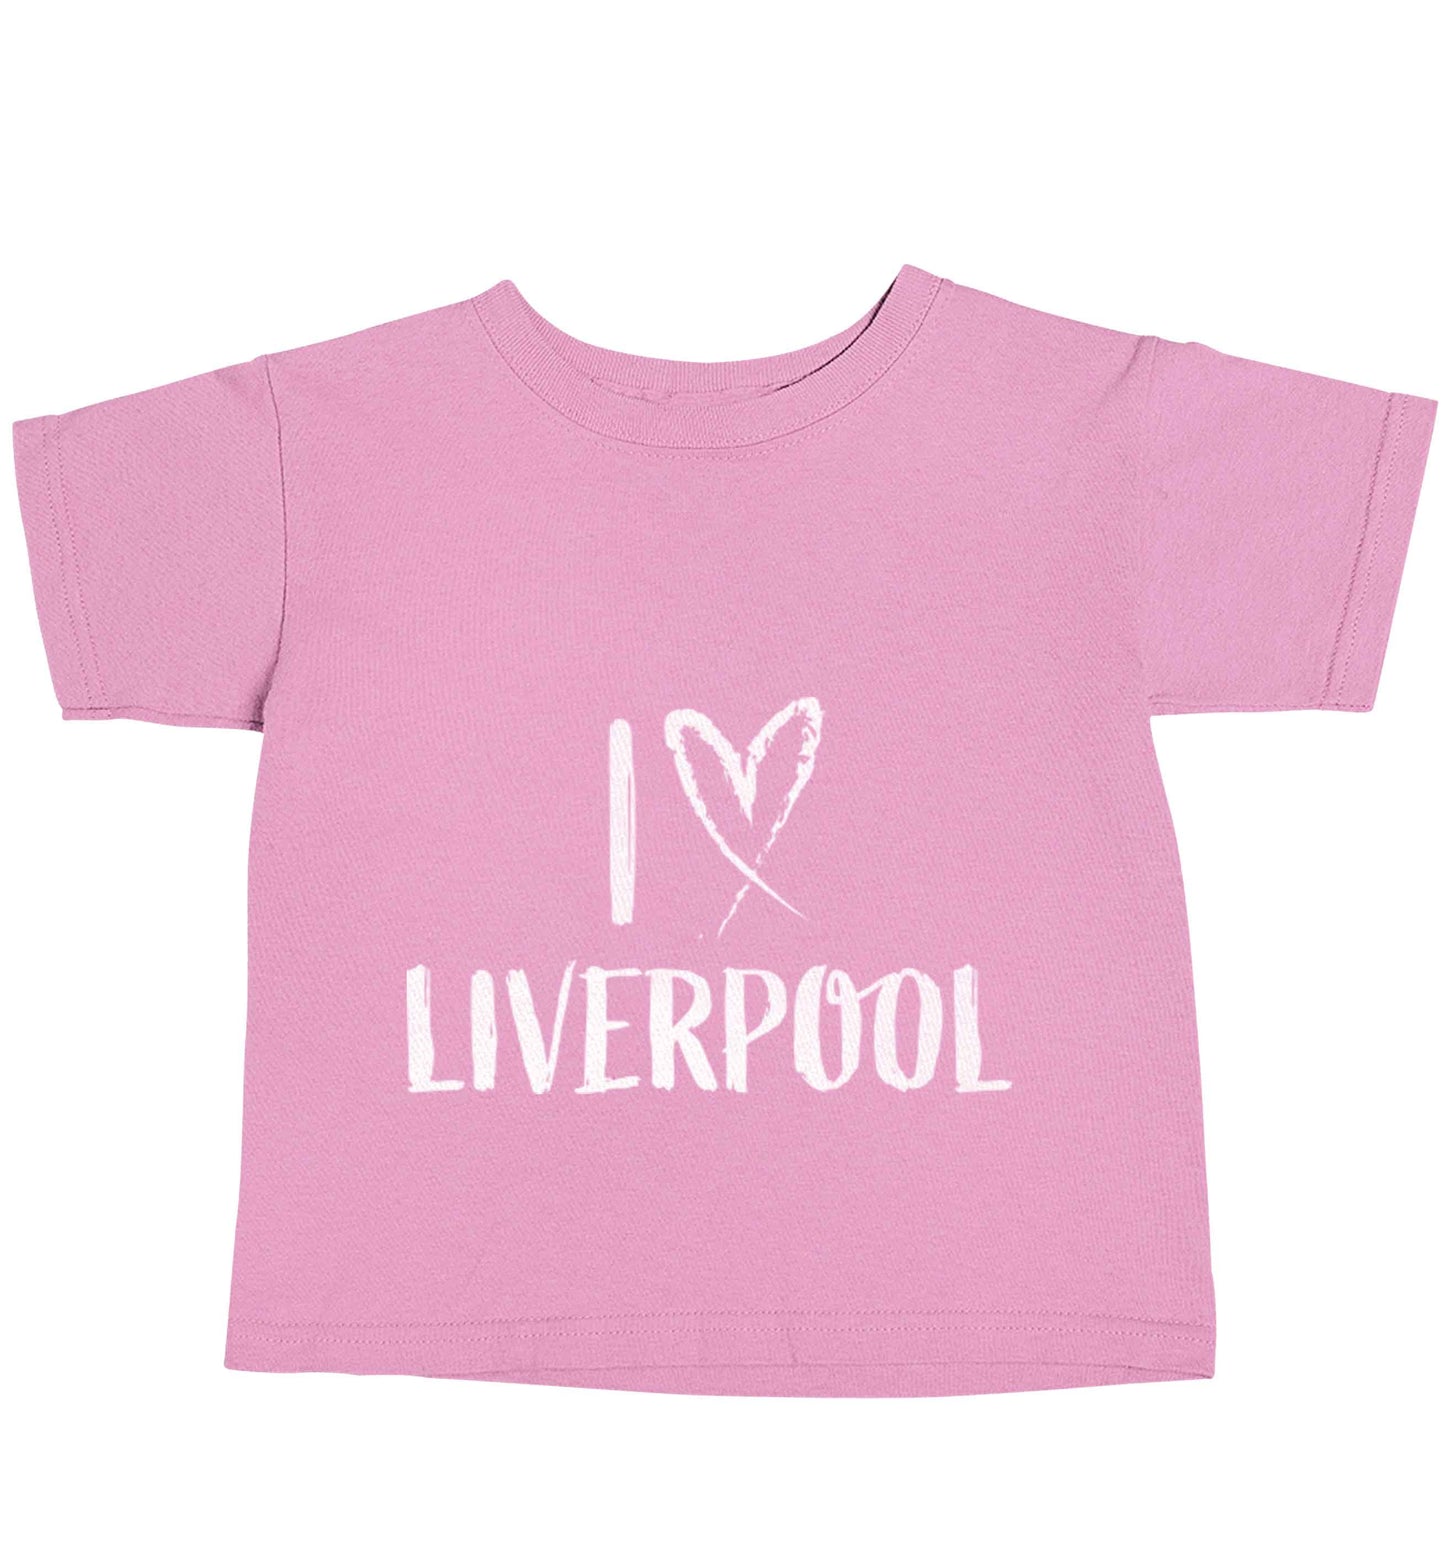 I love Liverpool light pink baby toddler Tshirt 2 Years